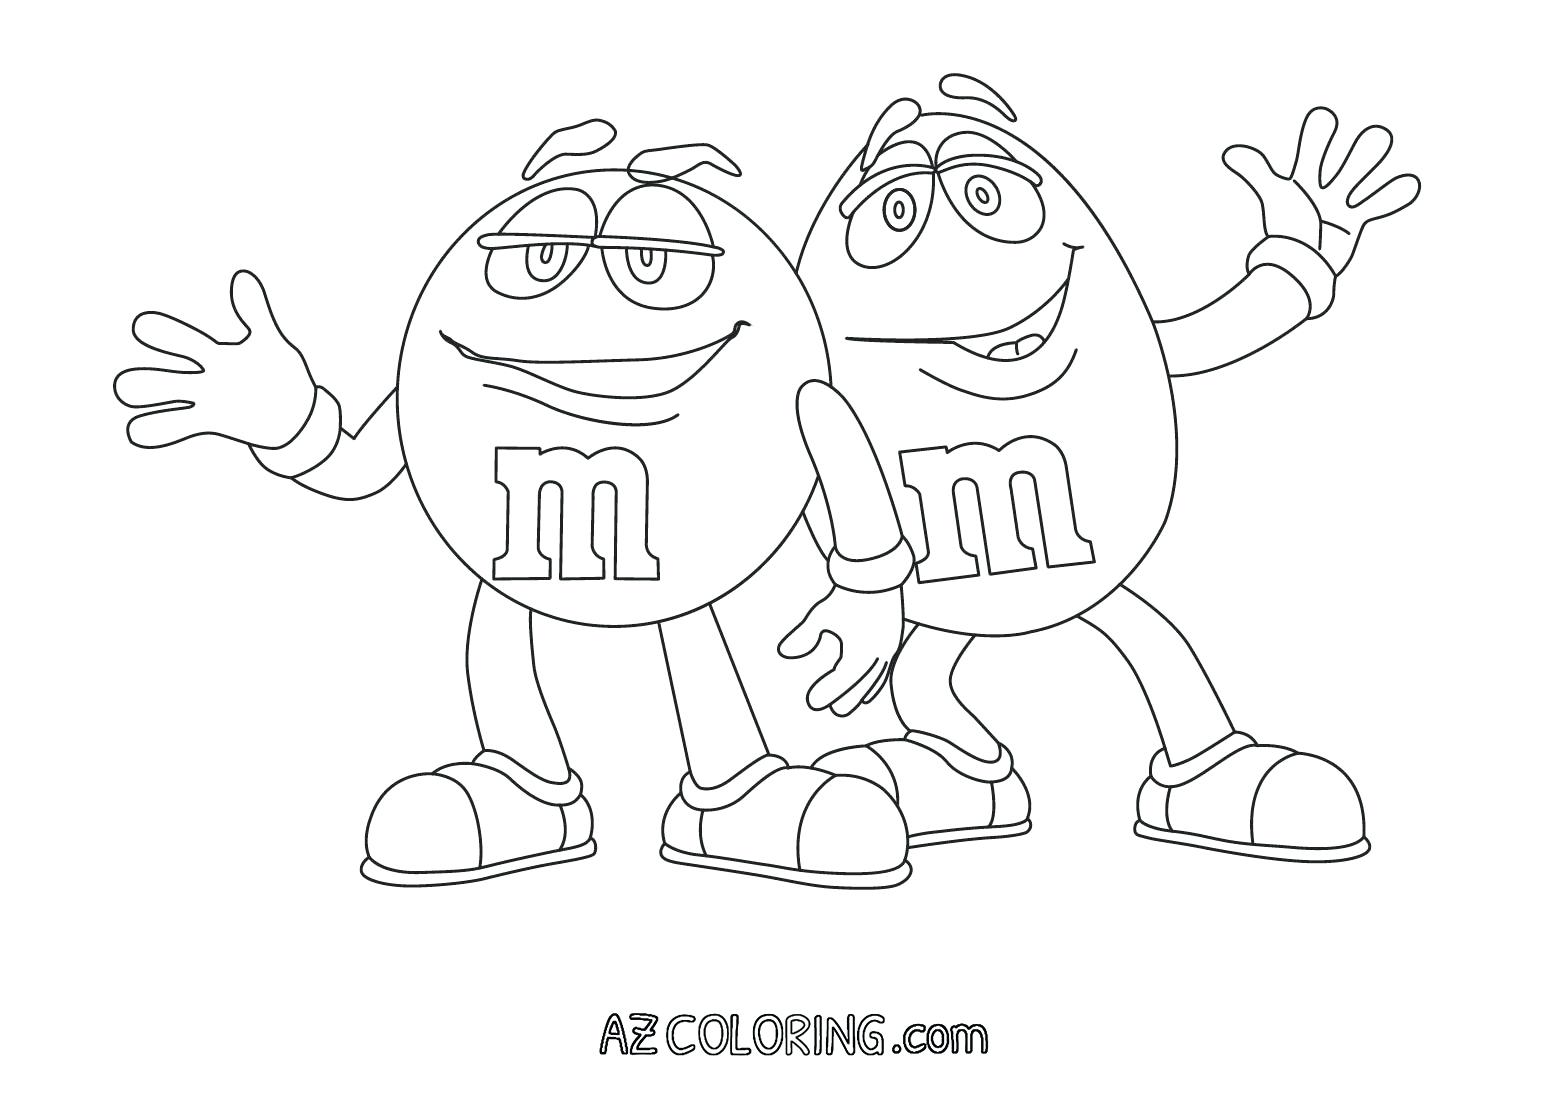 Peppermint Candy Coloring Pages at GetColorings.com | Free printable